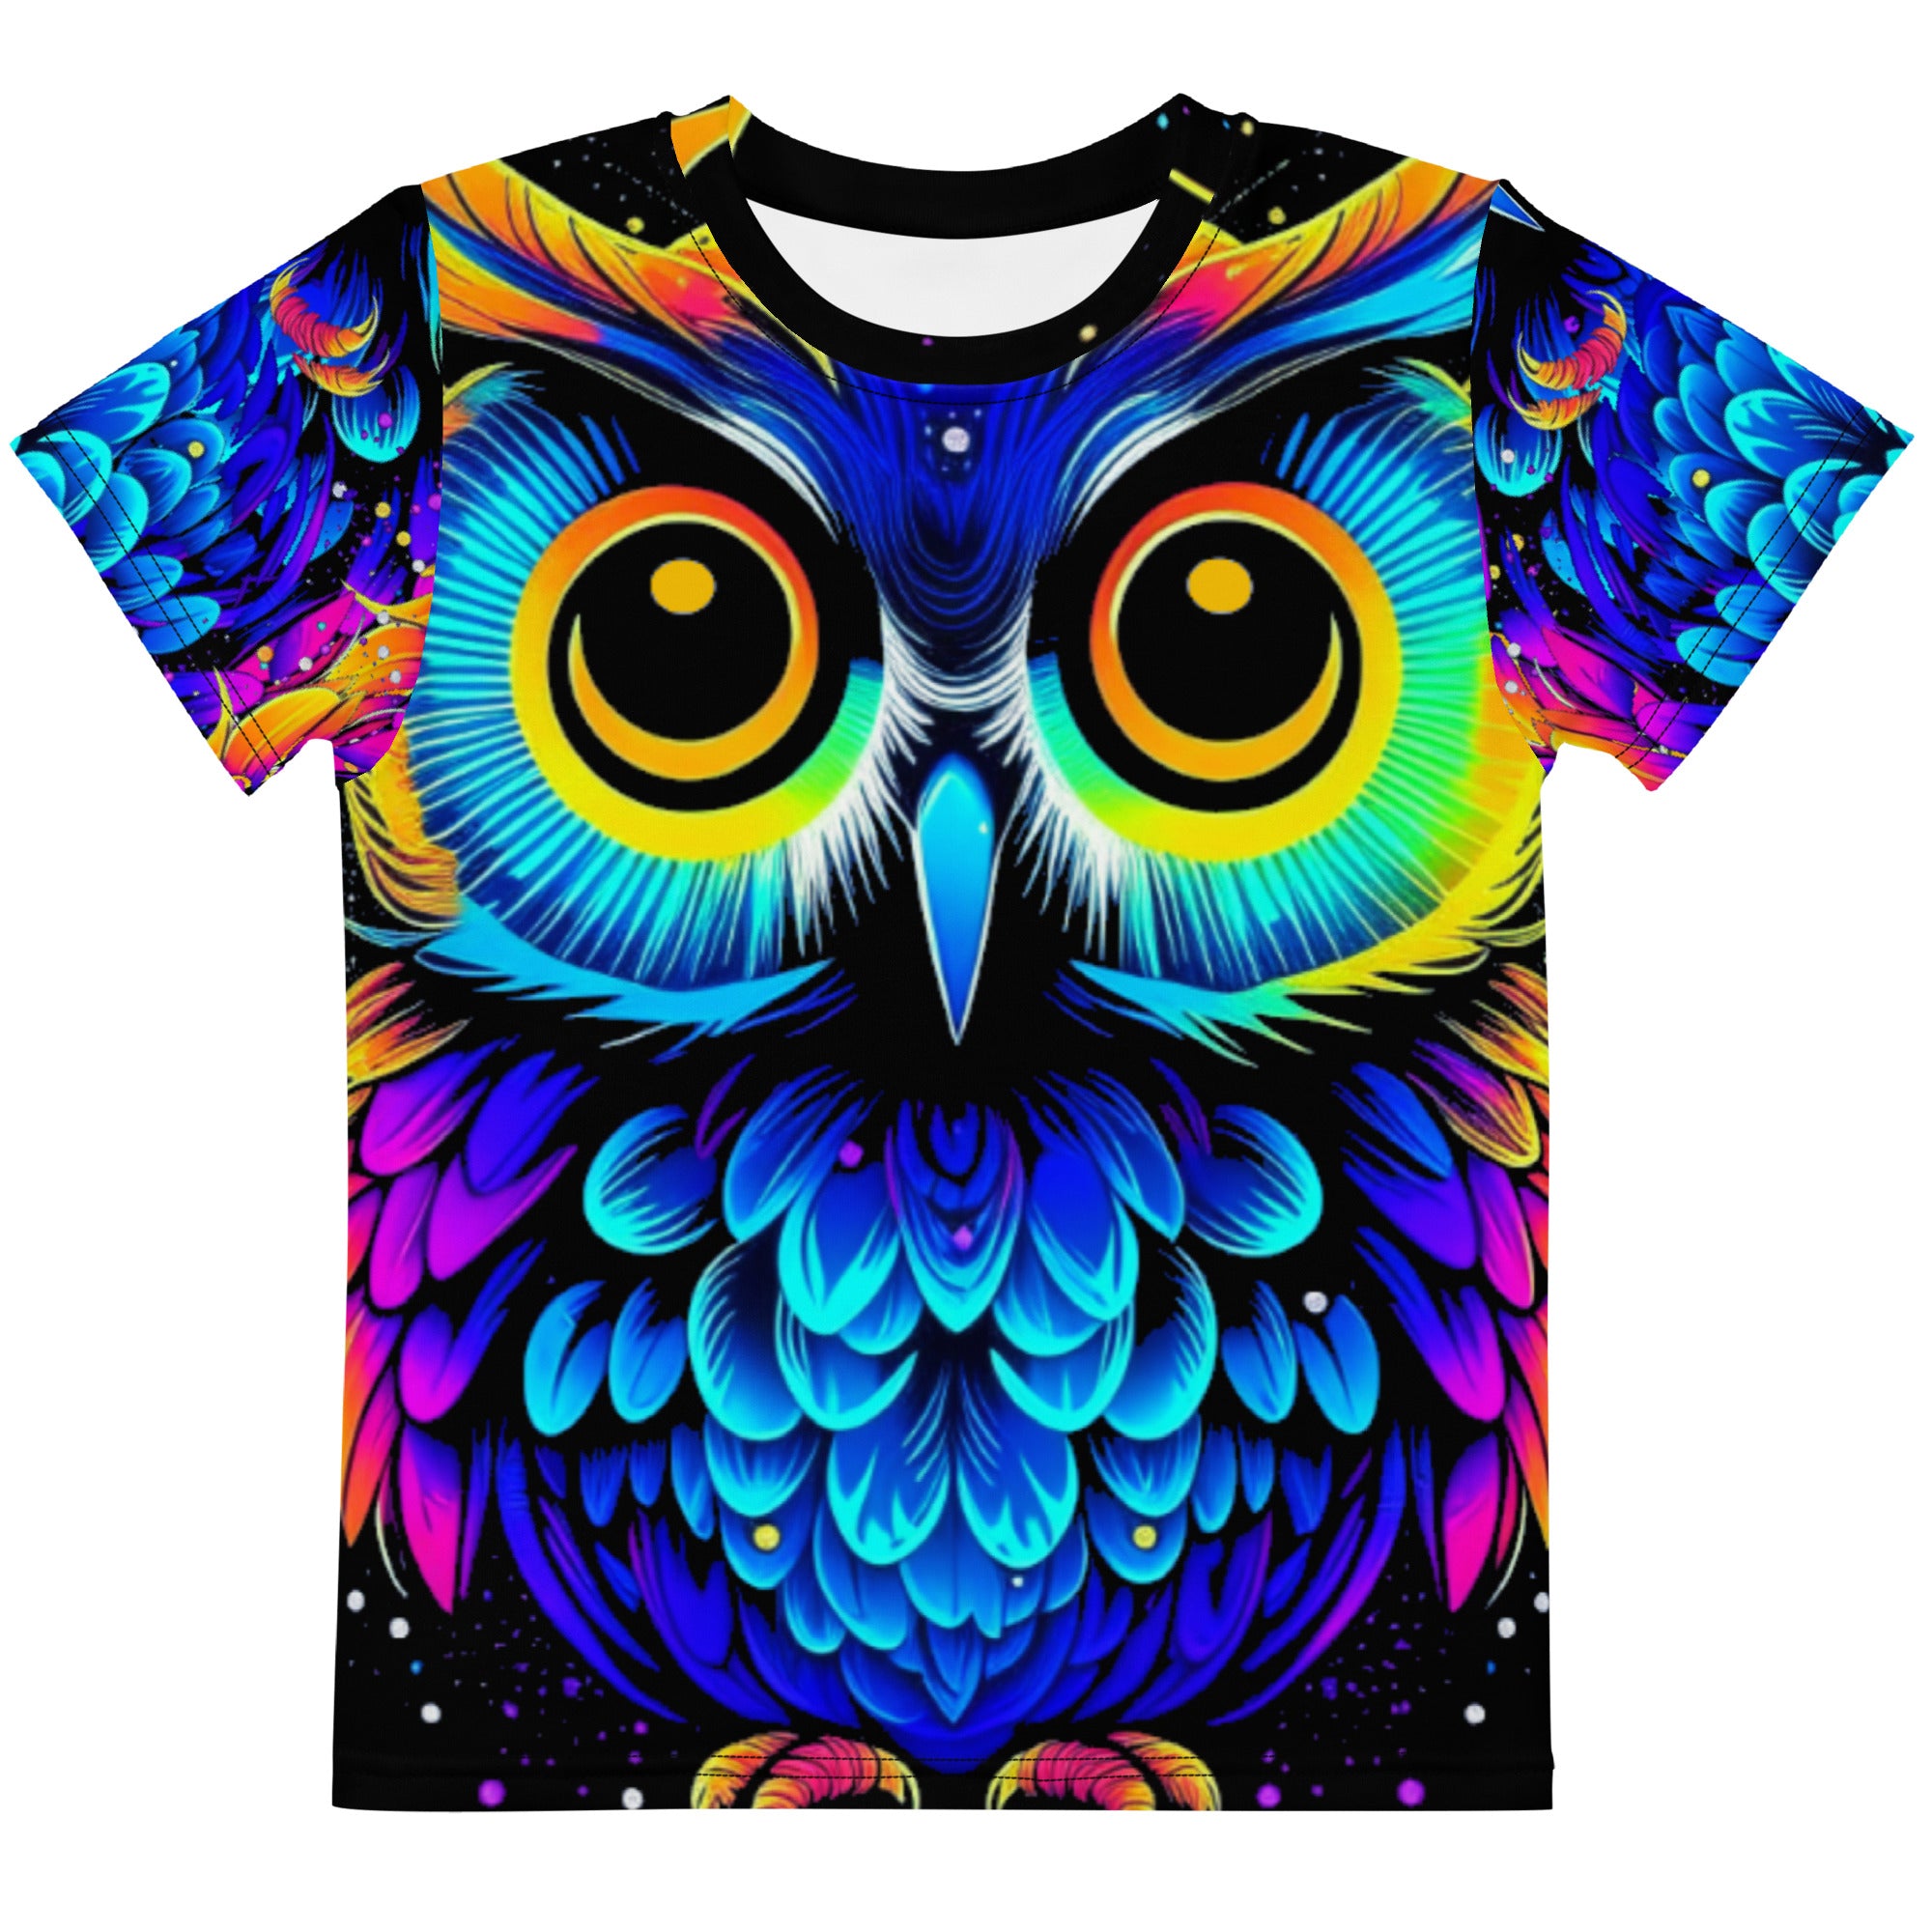 Get your toddler ready for the ultimate party in our Electric Owl Festival t-shirt! Inspired by rave culture, this shirt features a bold, vibrant electric owl design, perfect for little ones who love to stand out. Made with high-quality materials, your toddler will be comfortable and stylish all day long.